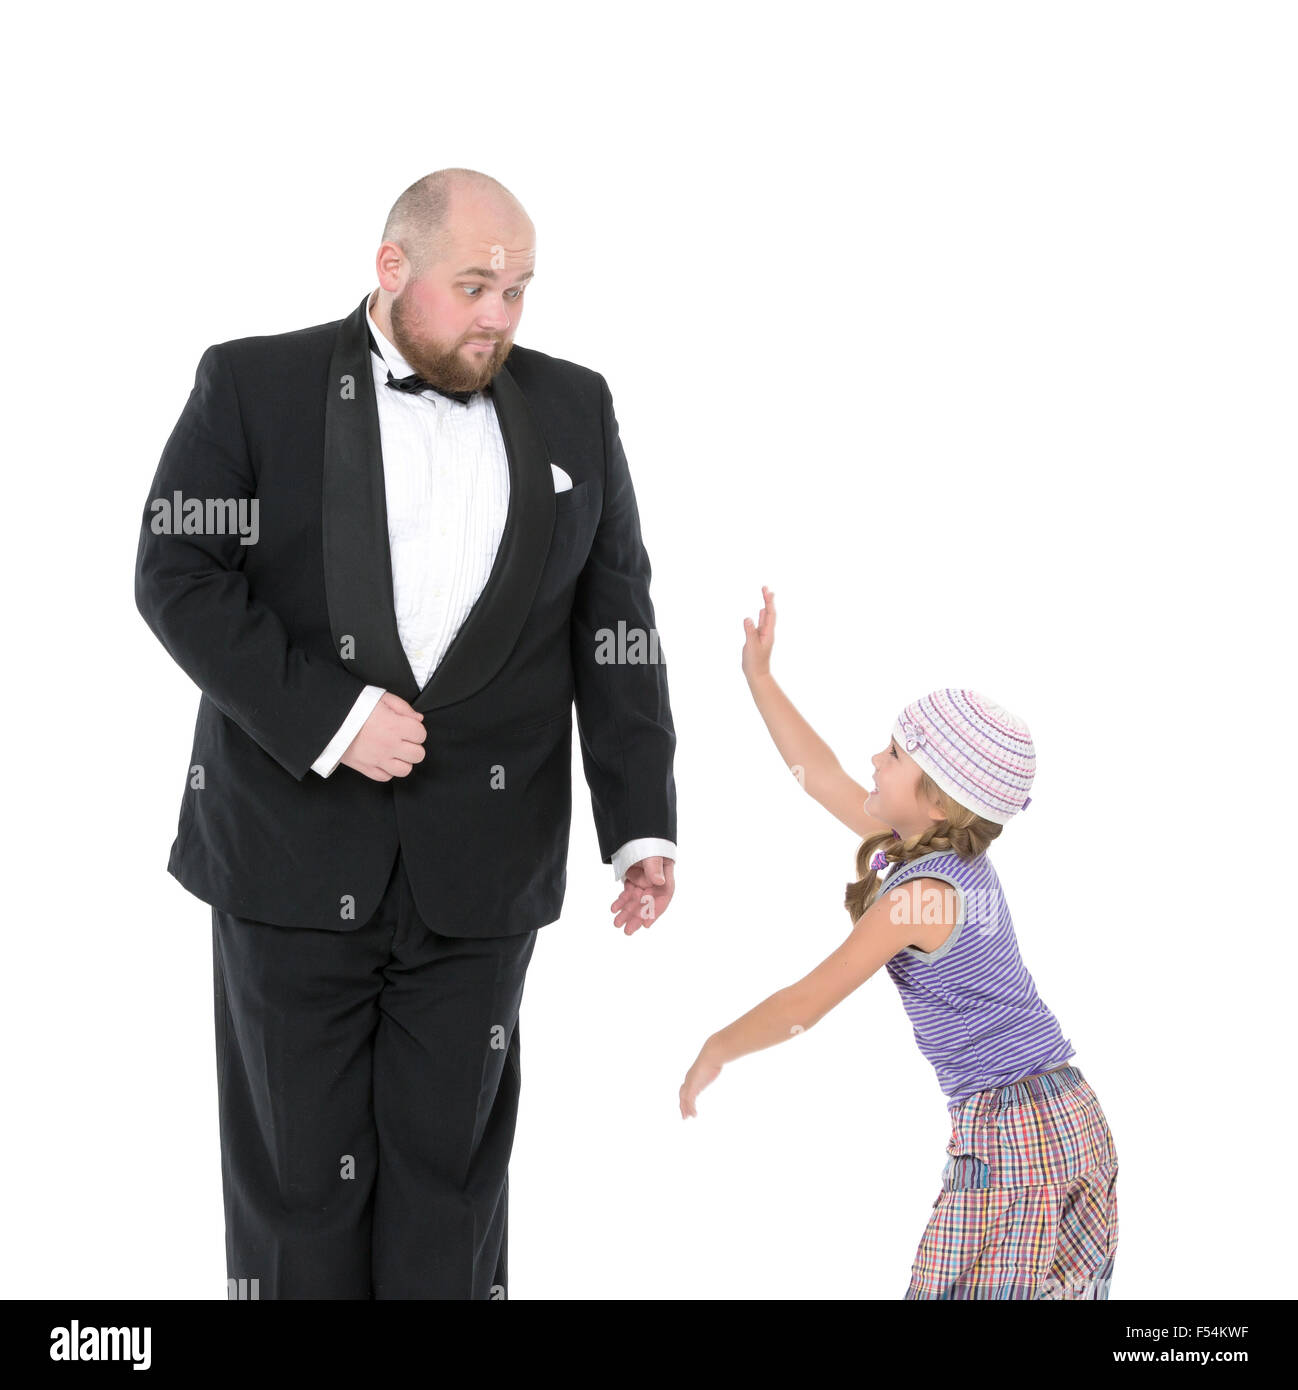 Little Girl and Servant in Tuxedo Have Fun, on white background Stock Photo